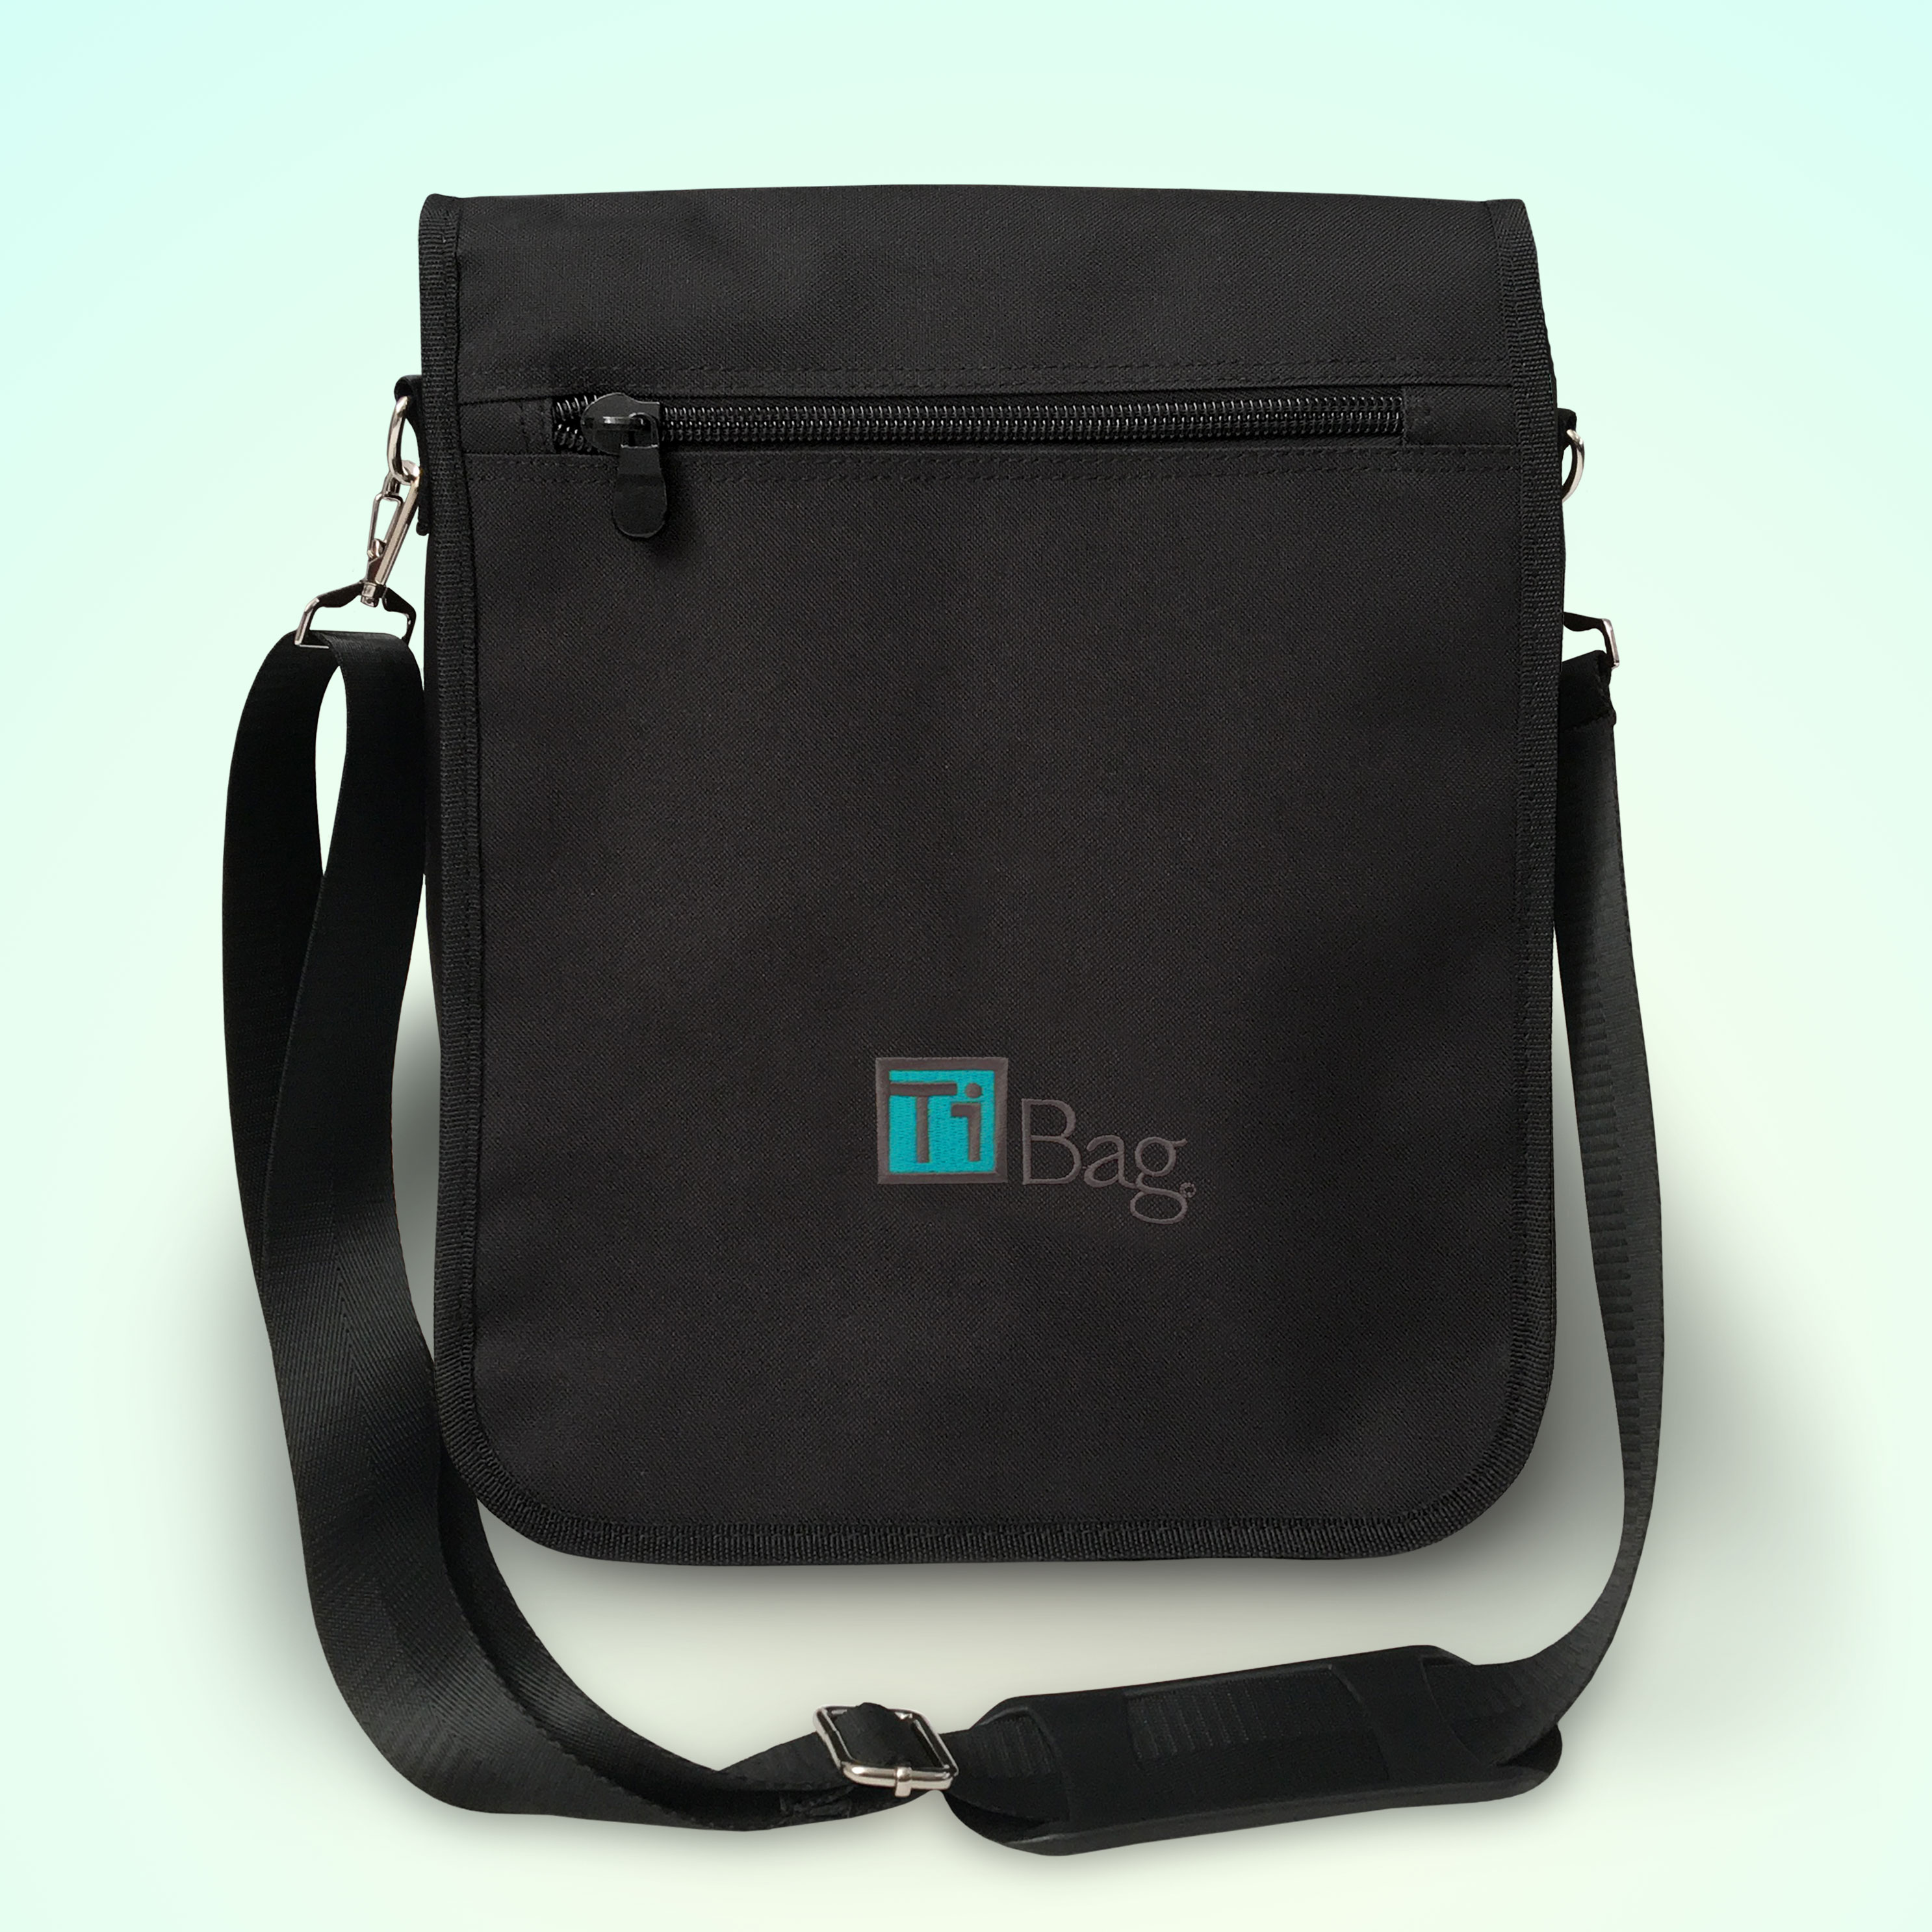 TiBag offers compact size, protection, comfort, and style.